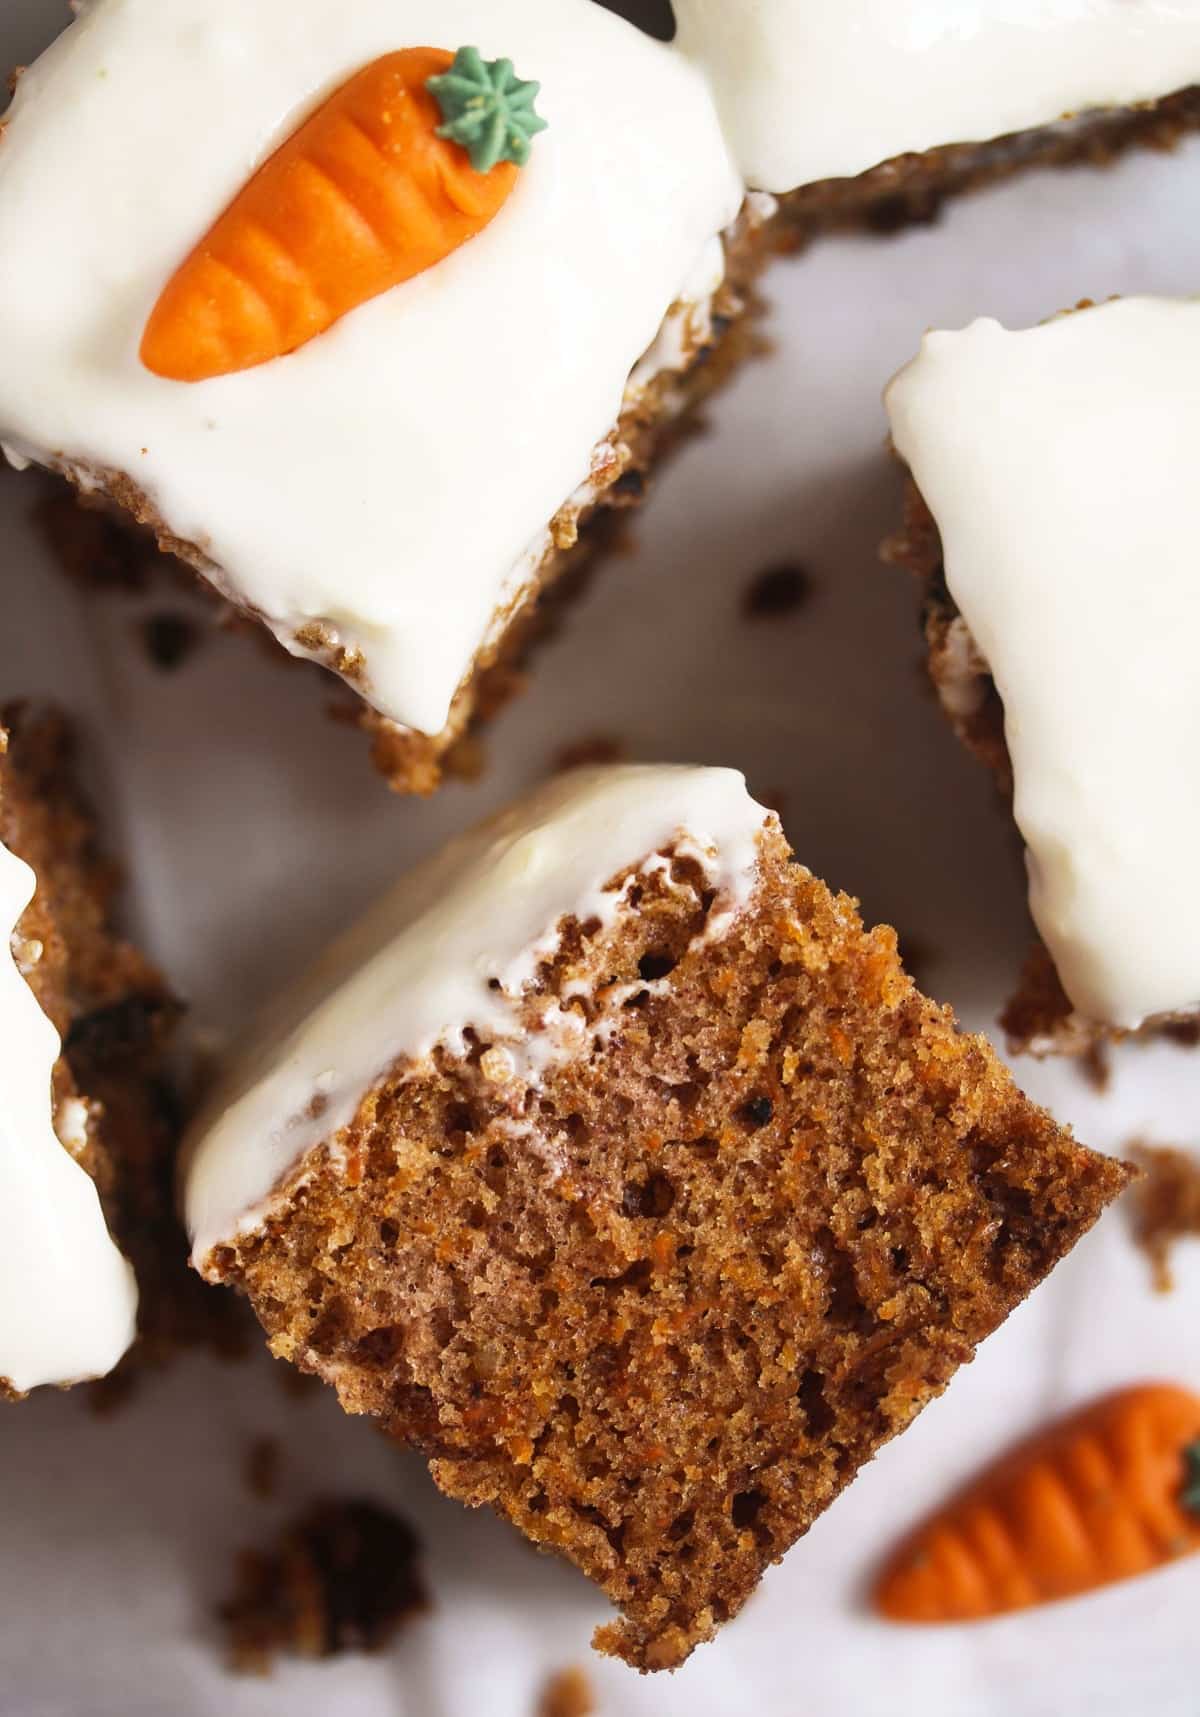 close up of a square of carrot cake showing the moist crumb, another frosted piece beside it.